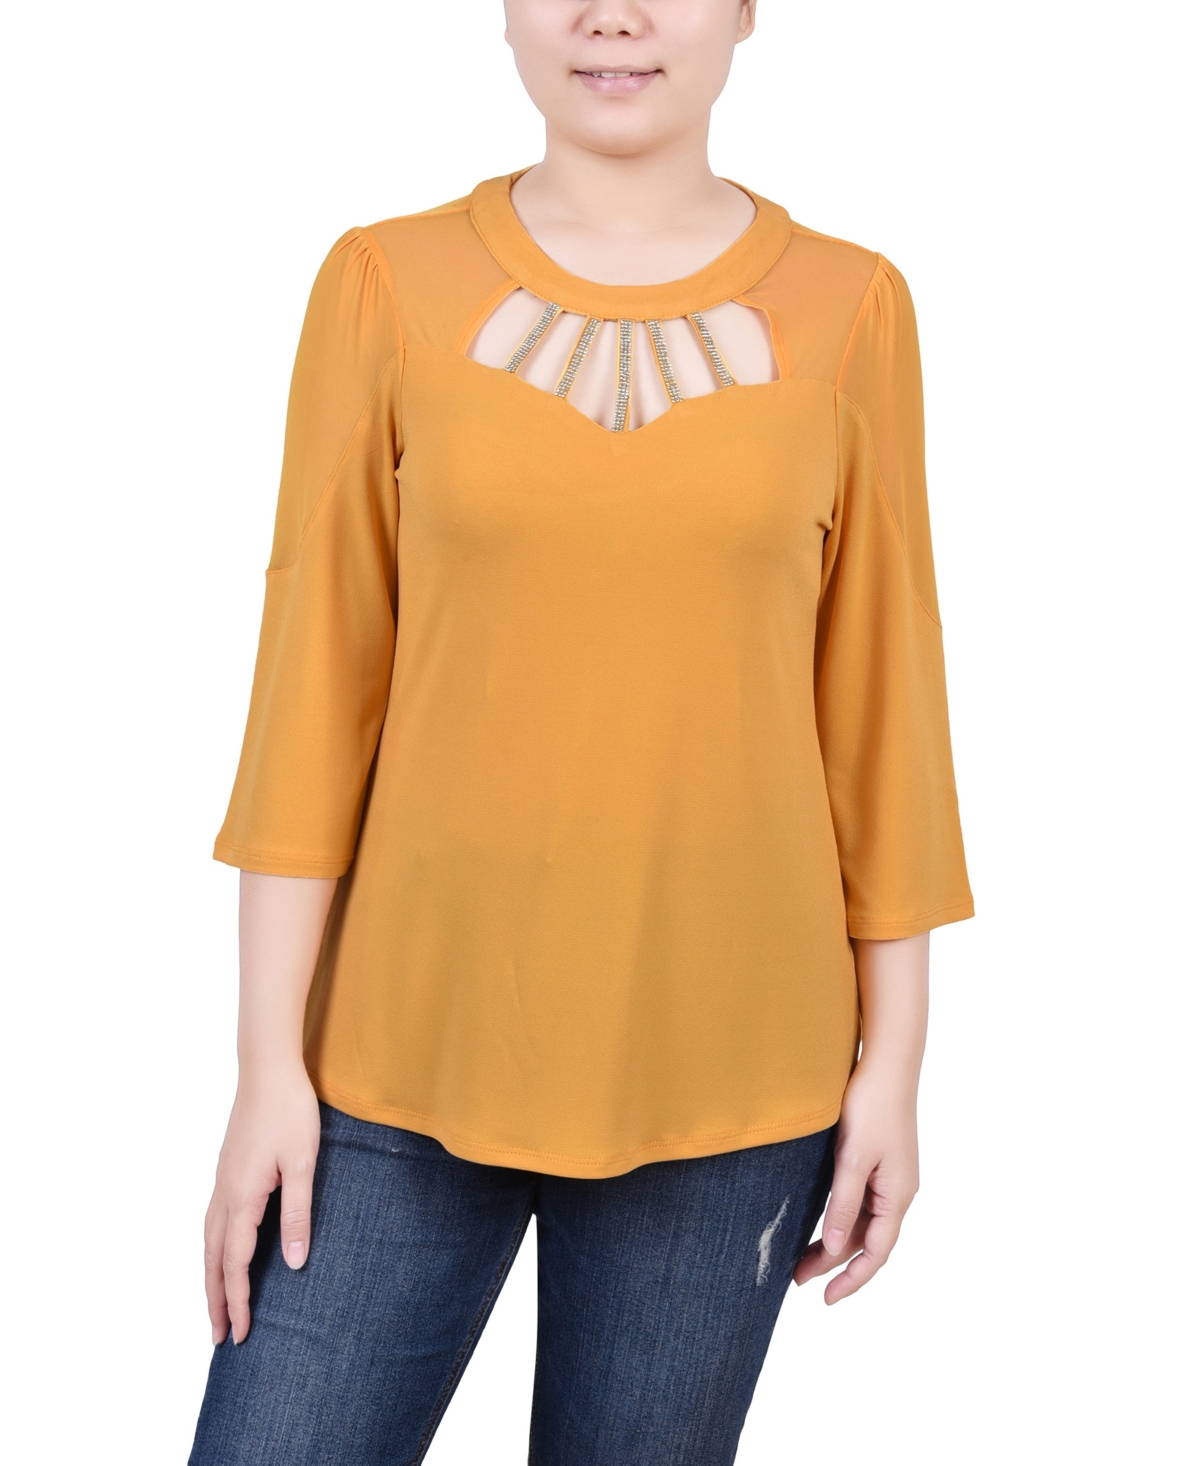 NY COLLECTION WOMEN'S 3/4 SLEEVE TOP WITH NECKLINE CUTOUTS AND STONES